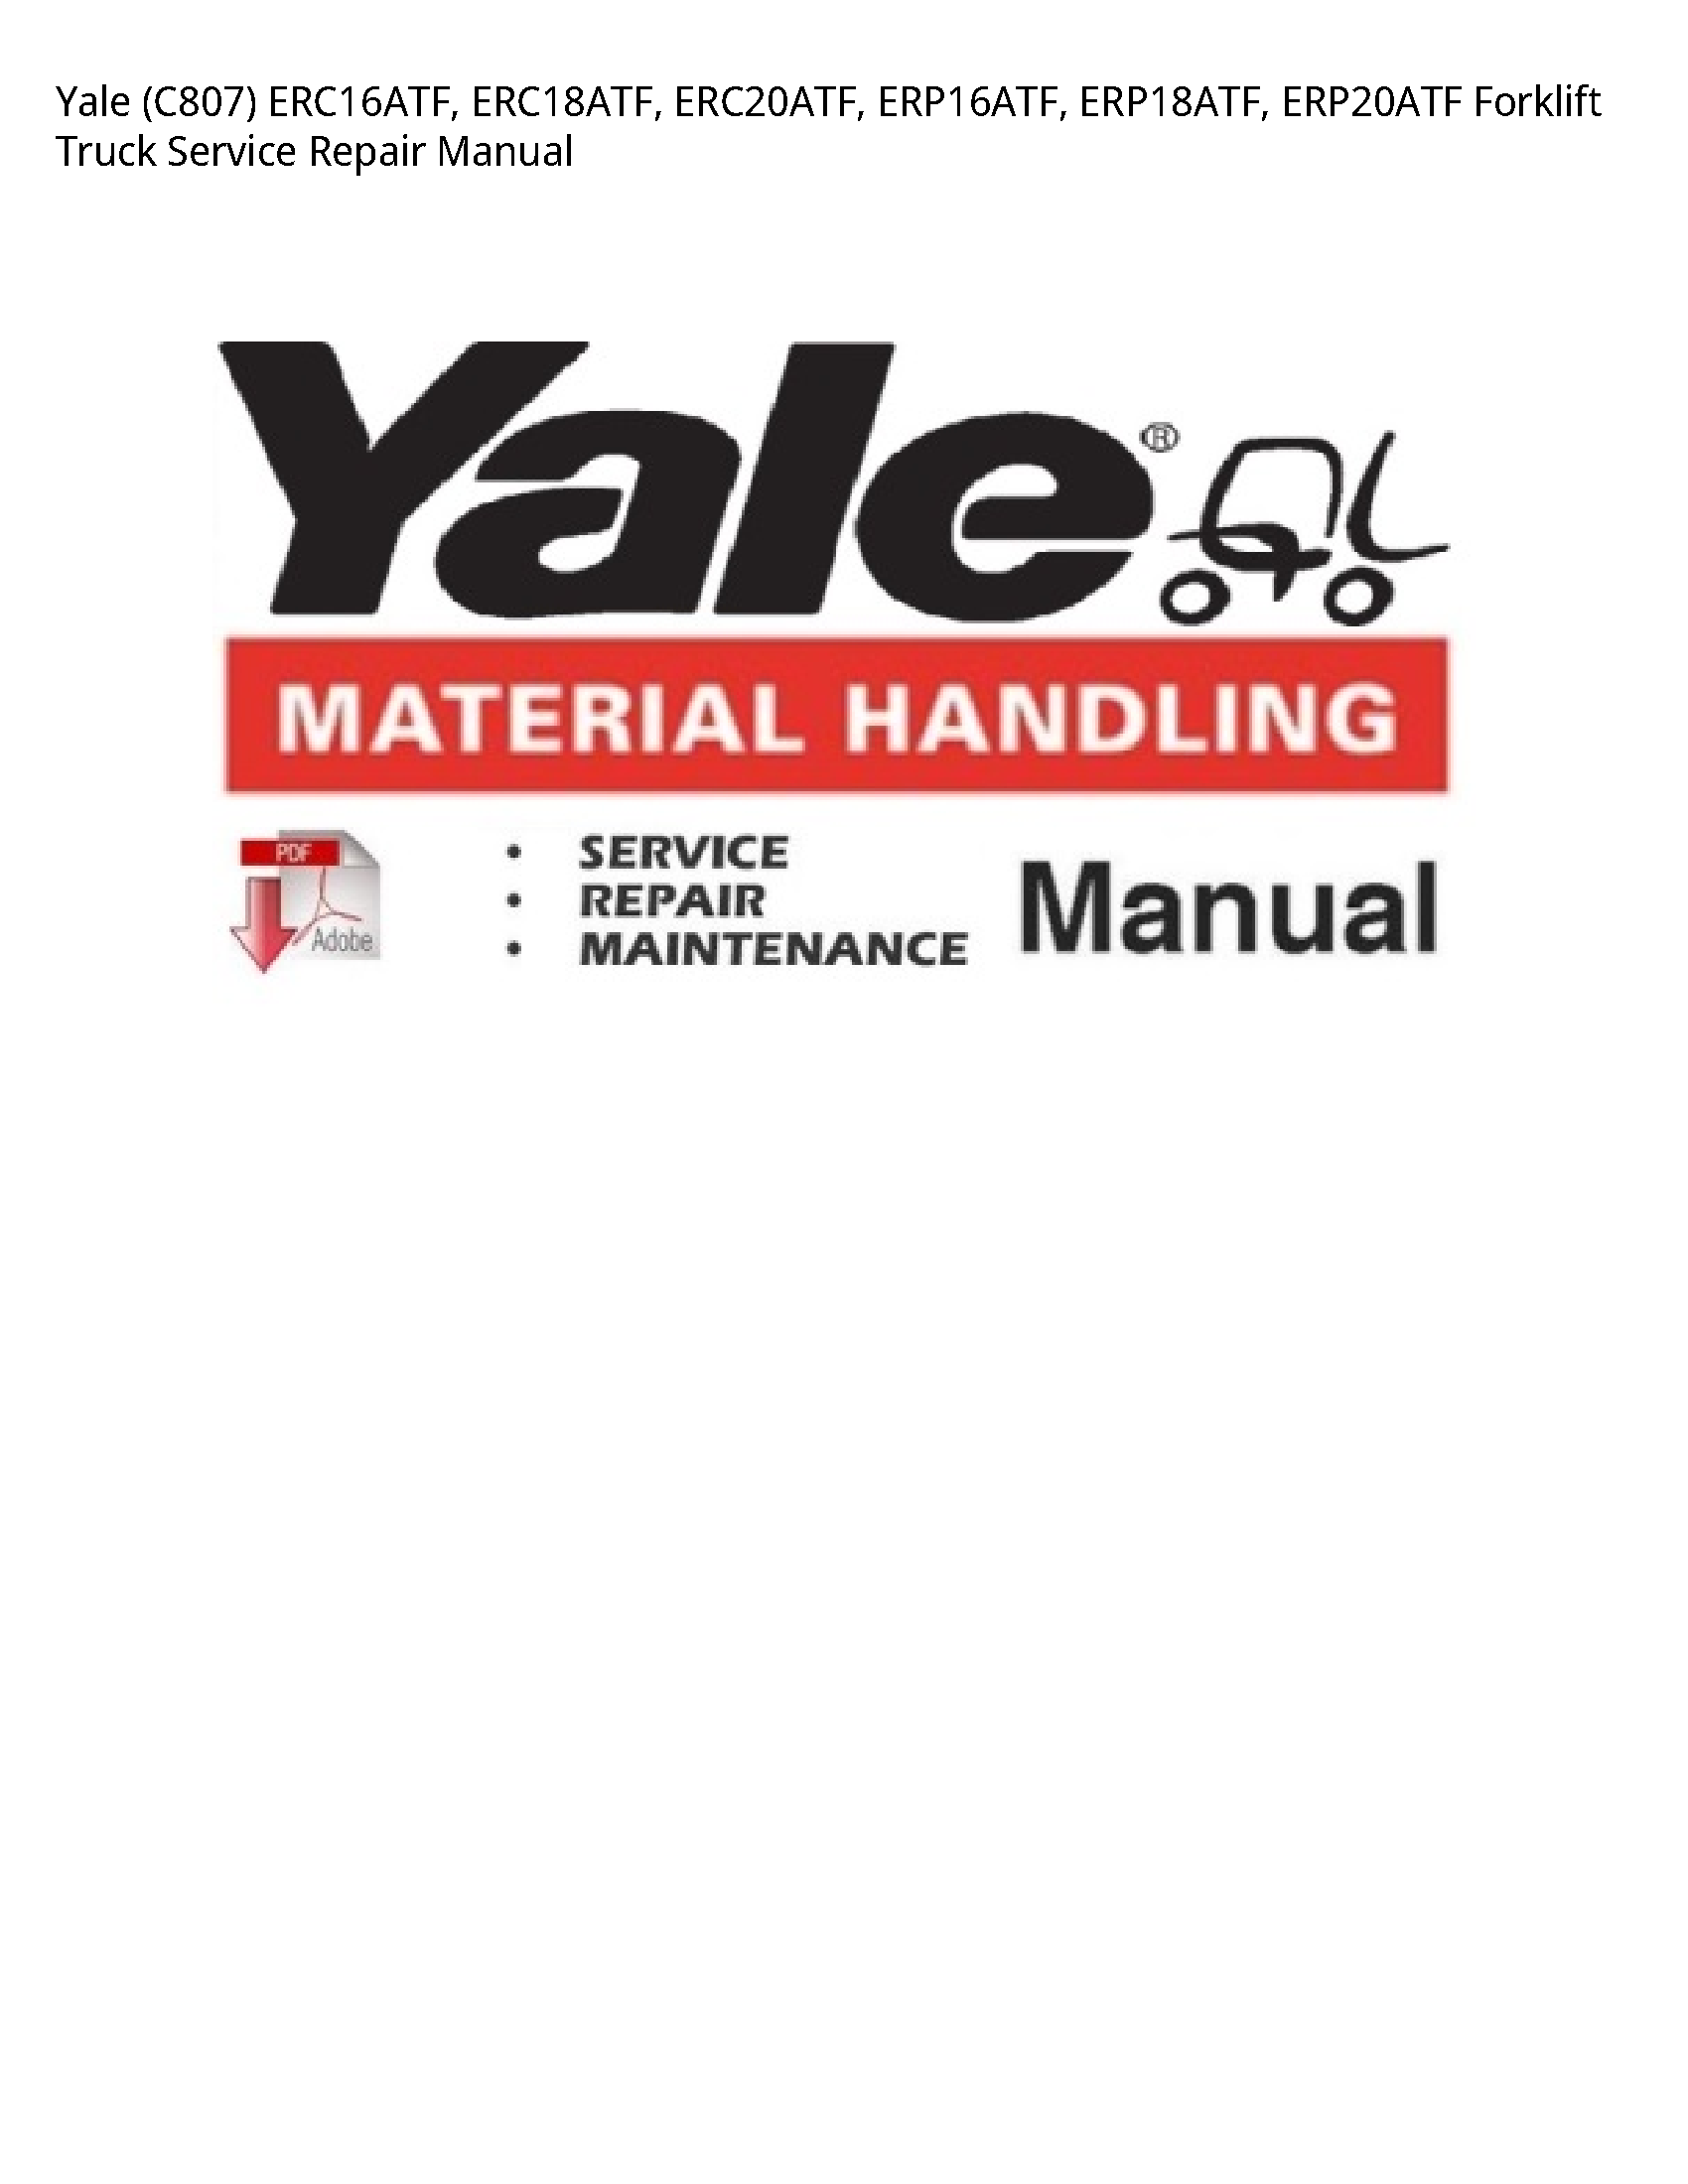 Yale (C807) Forklift Truck manual